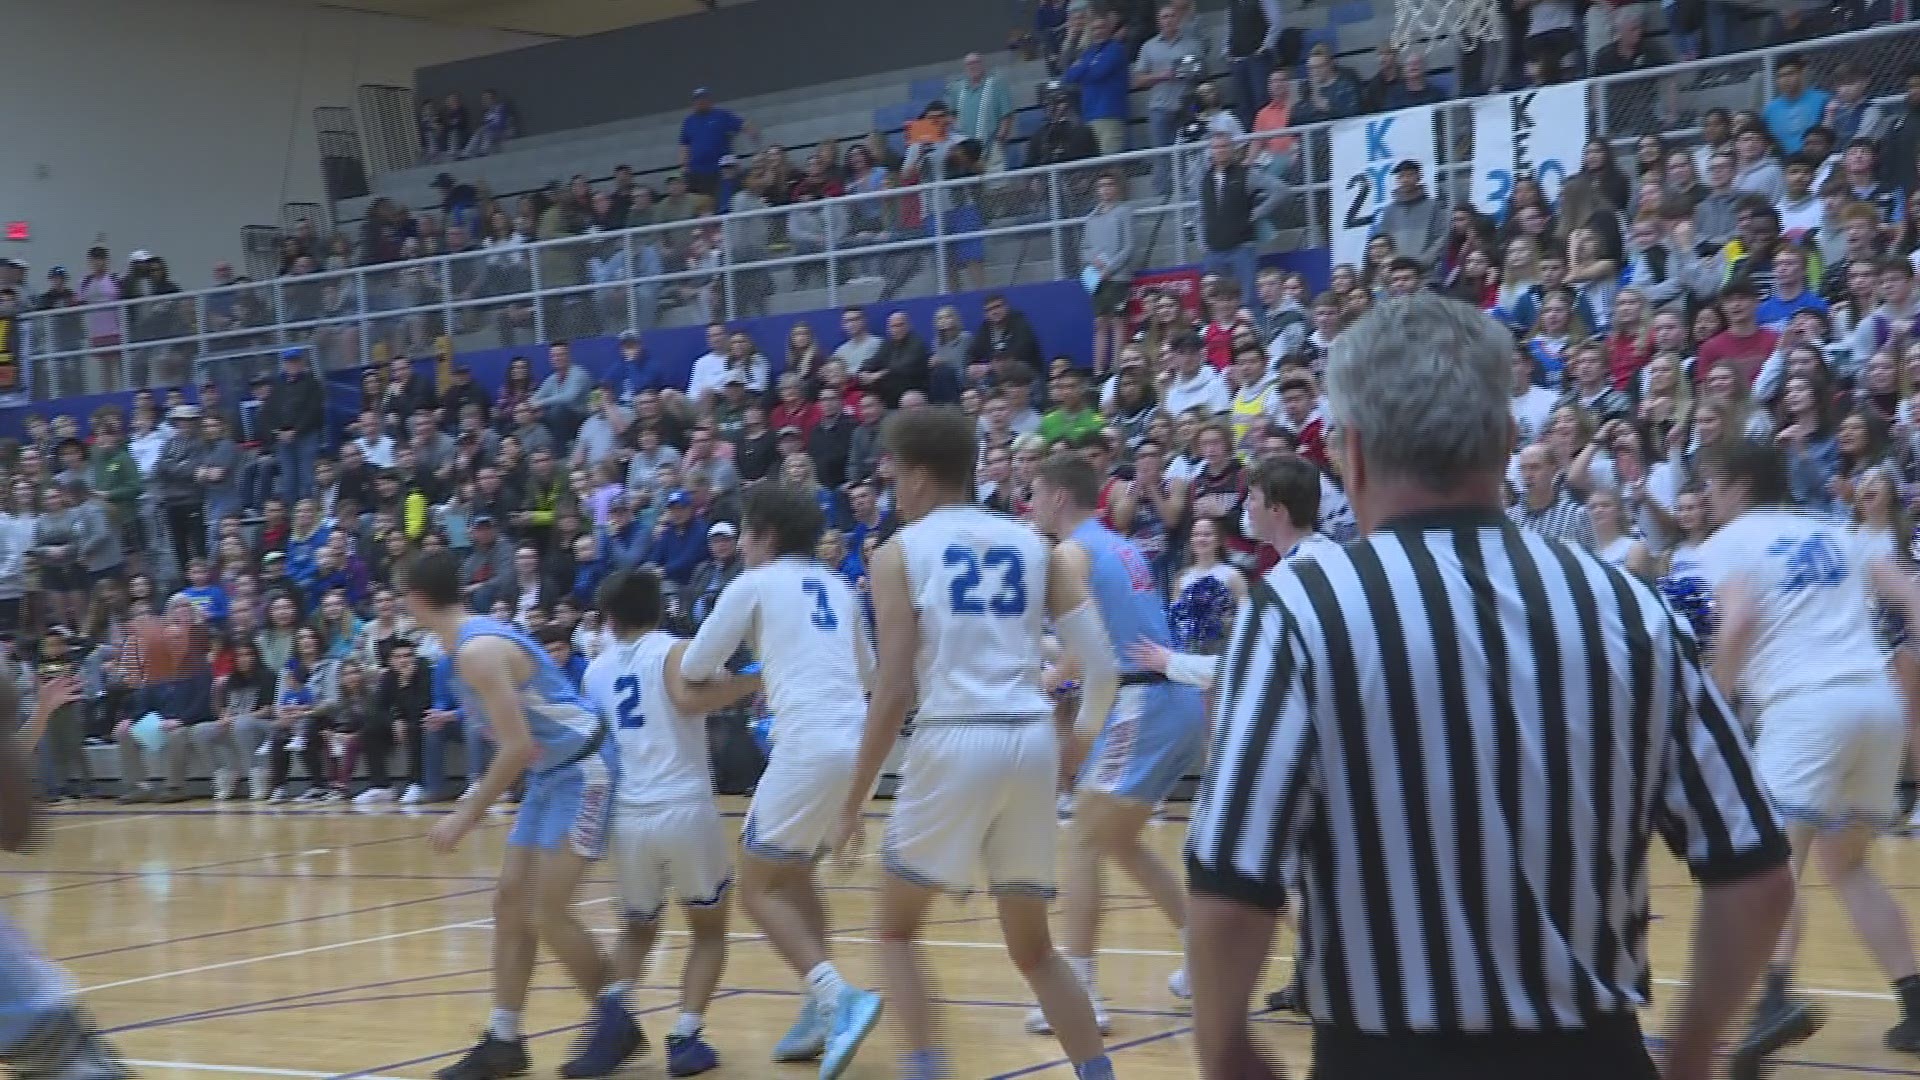 Highlights of No. 6 South Salem's 85-50 win over McNary on Feb. 28, 2020. Highlights are part of KGW's Friday Night Hoops with Orlando Sanchez.